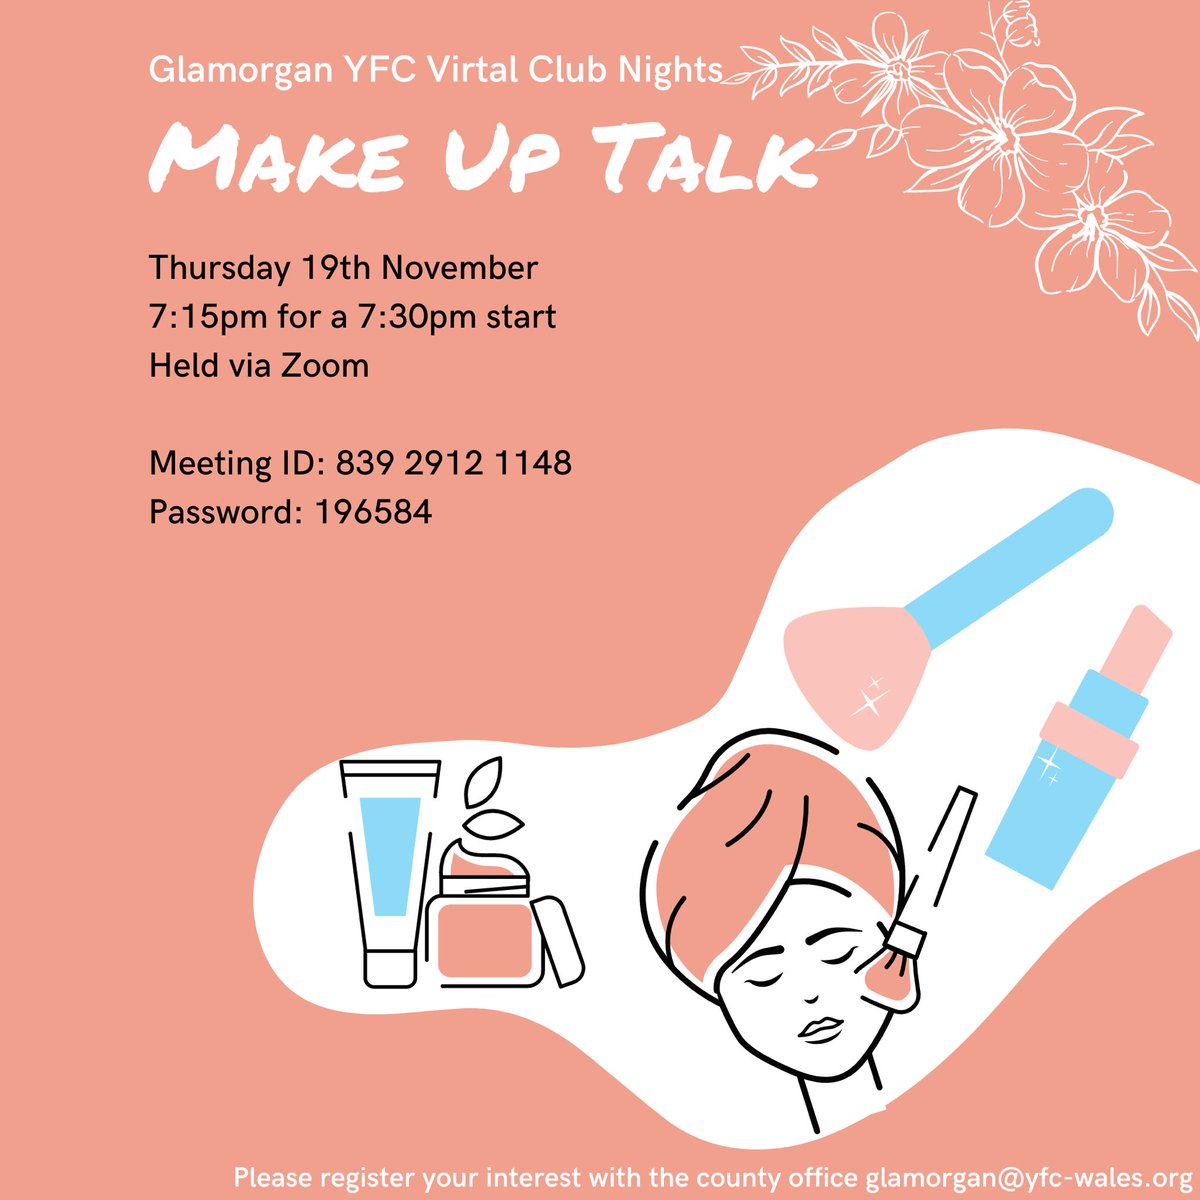 This Thursday we have a fab night in store with our make-up talk. Whether you want to learn to enhance your best features or find the difference between day & evening wear or perhaps you don’t know your eyelash curler from your beauty blender then this is the night for you.